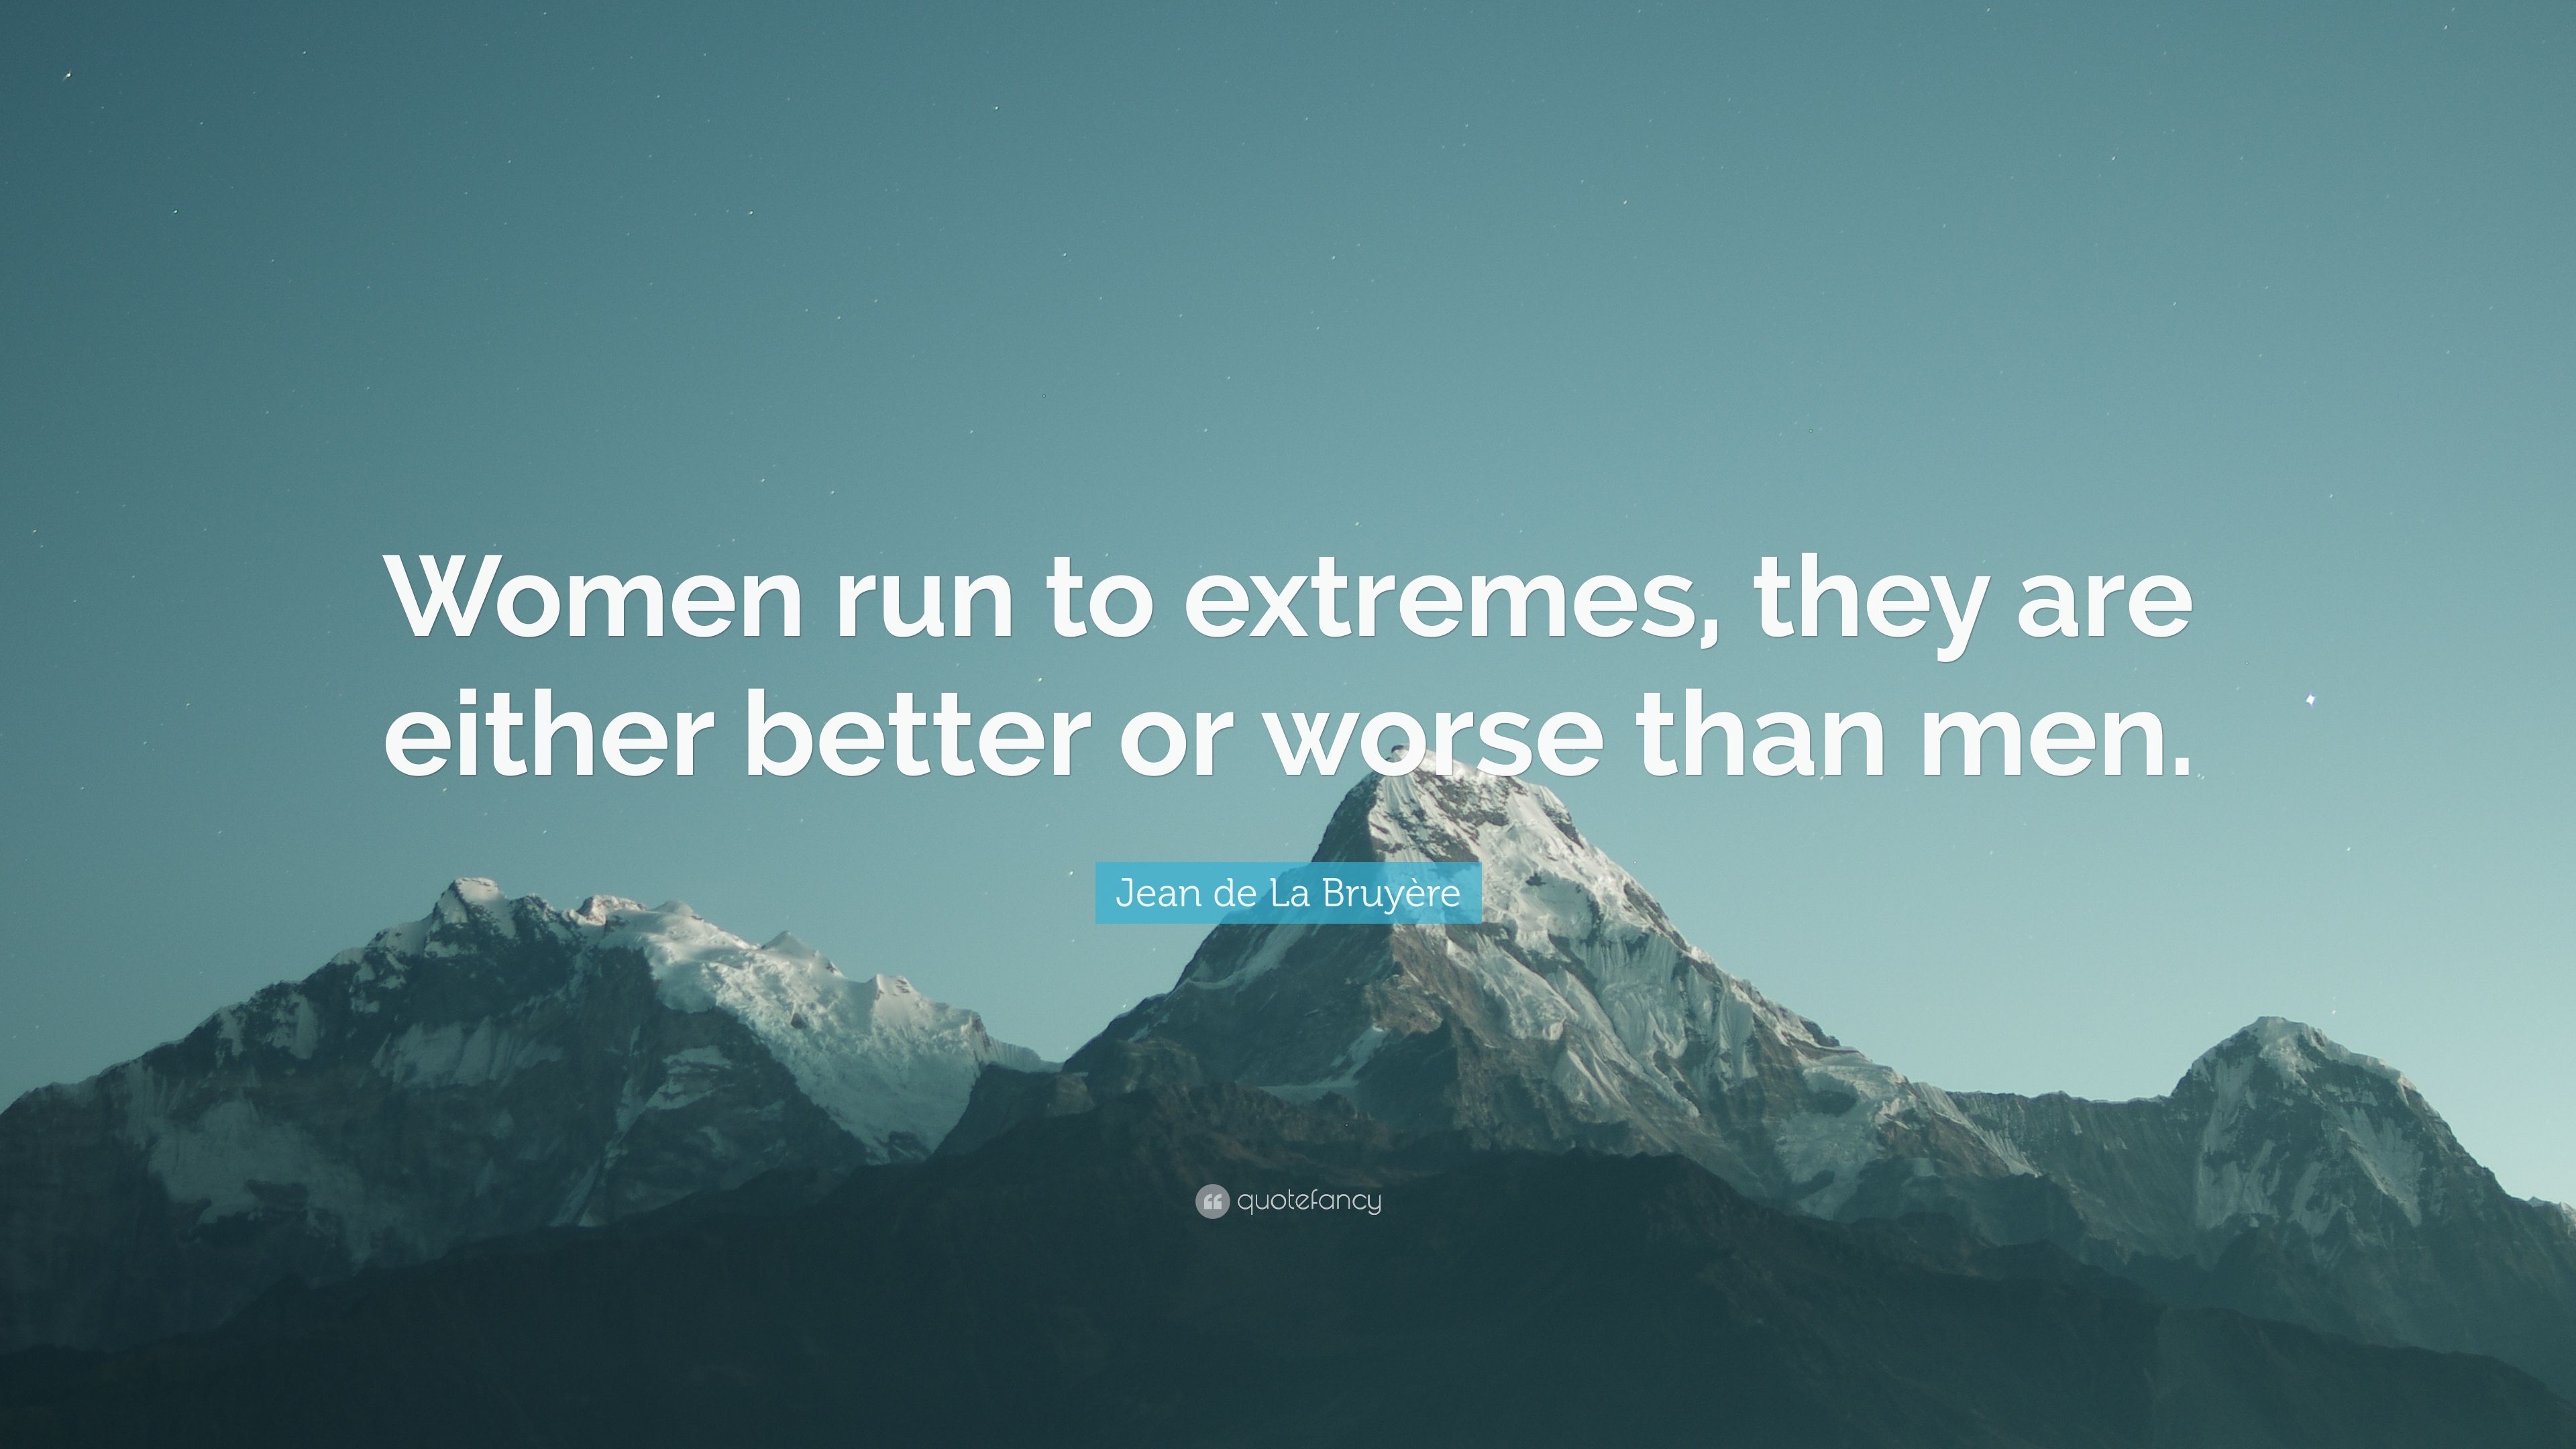 Jean de La Bruyère Quote: “Women run to extremes, they are either